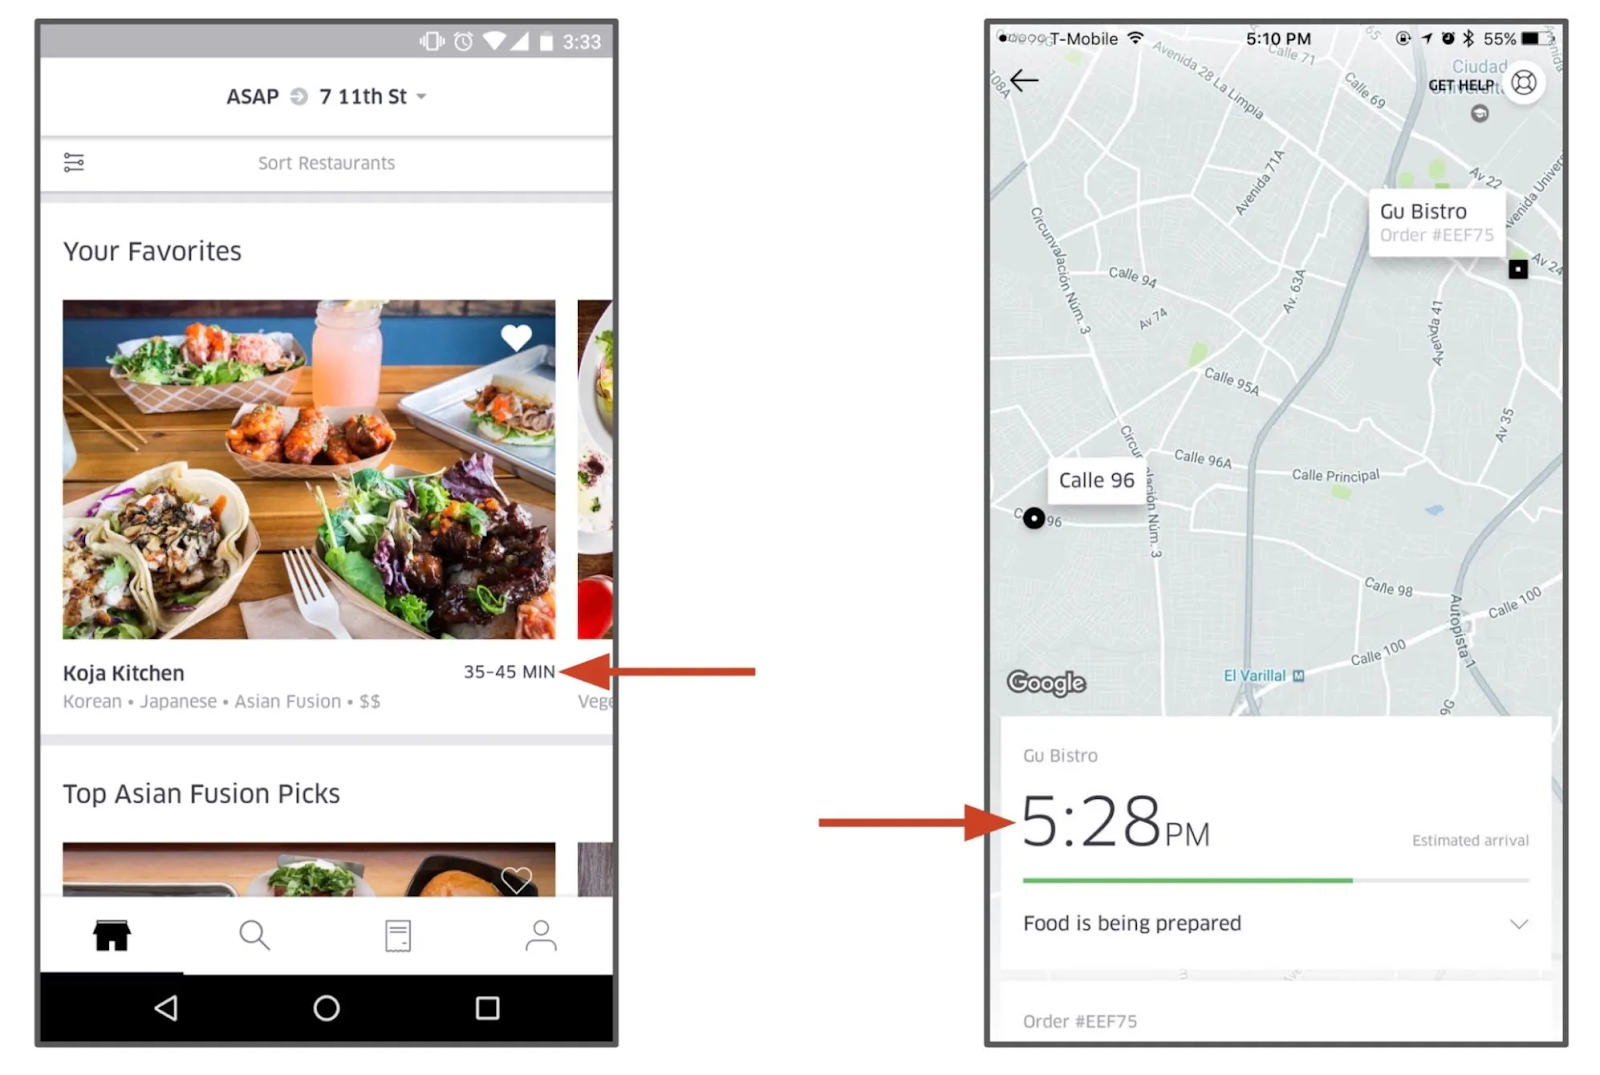 The UberEATS application incorporates a feature for estimating delivery times, which is powered by machine learning models developed using Michelangelo.